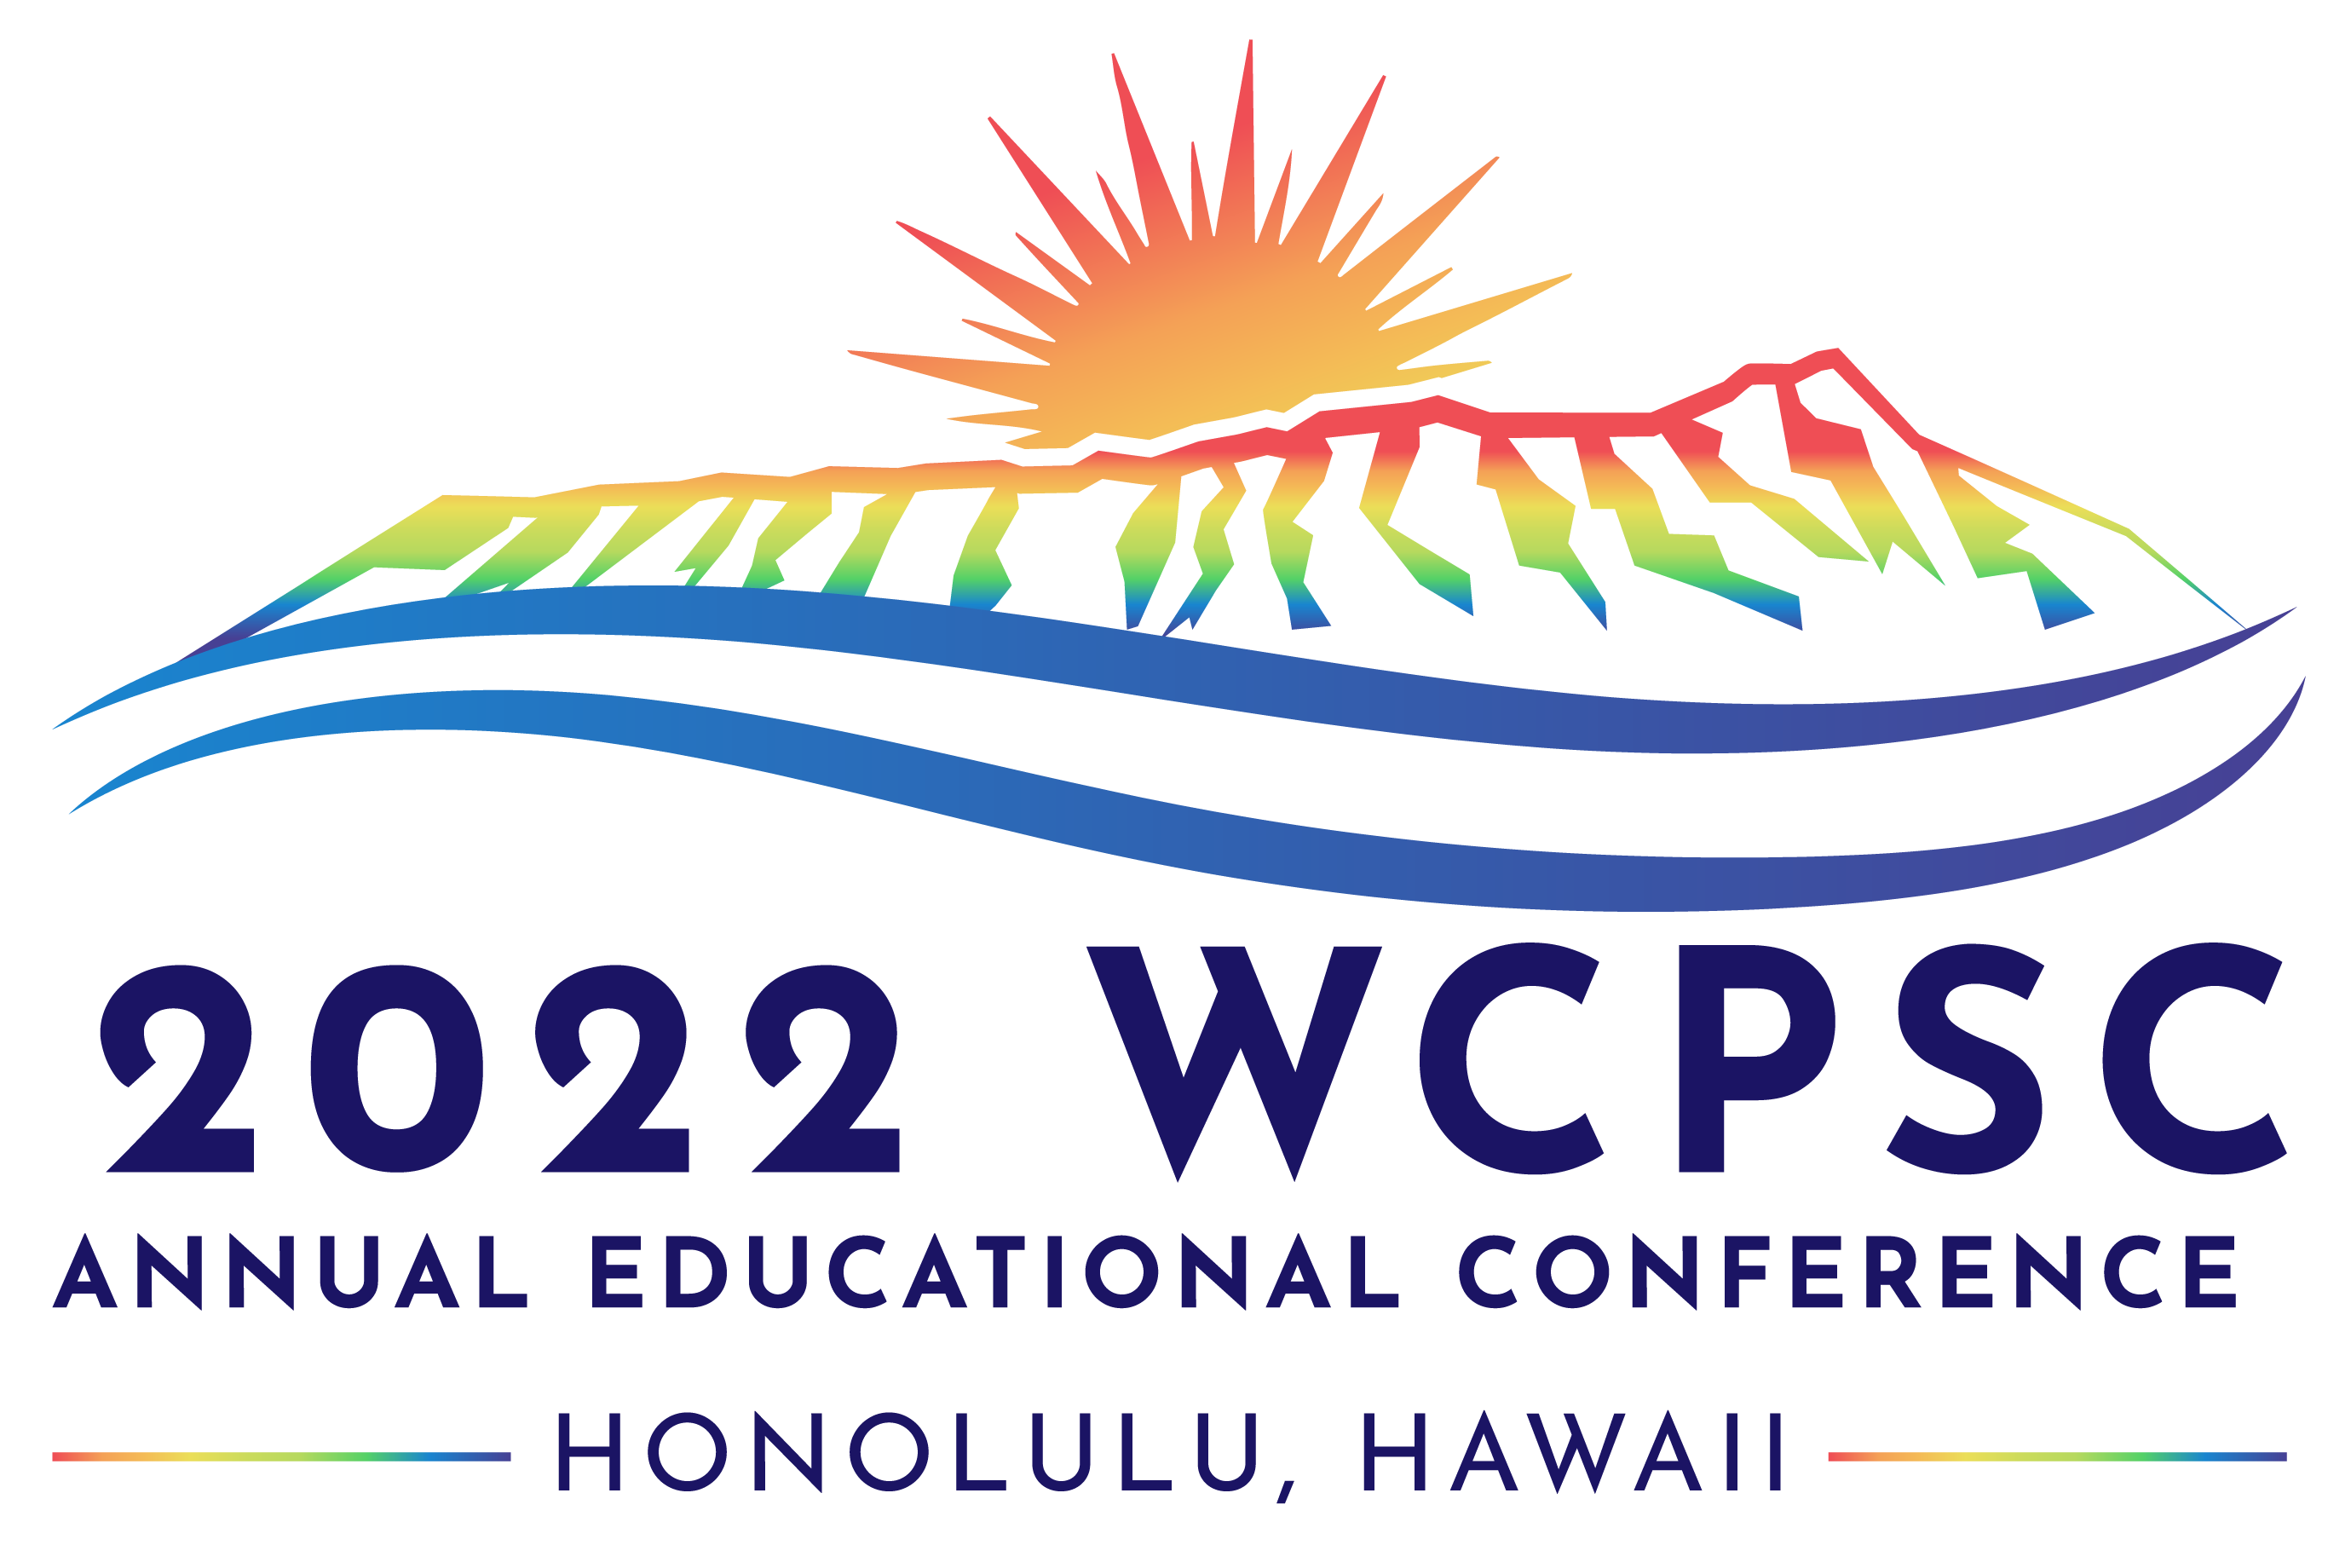 2022 WCPSC Annual Education Conference Logo - Link to Conference Website